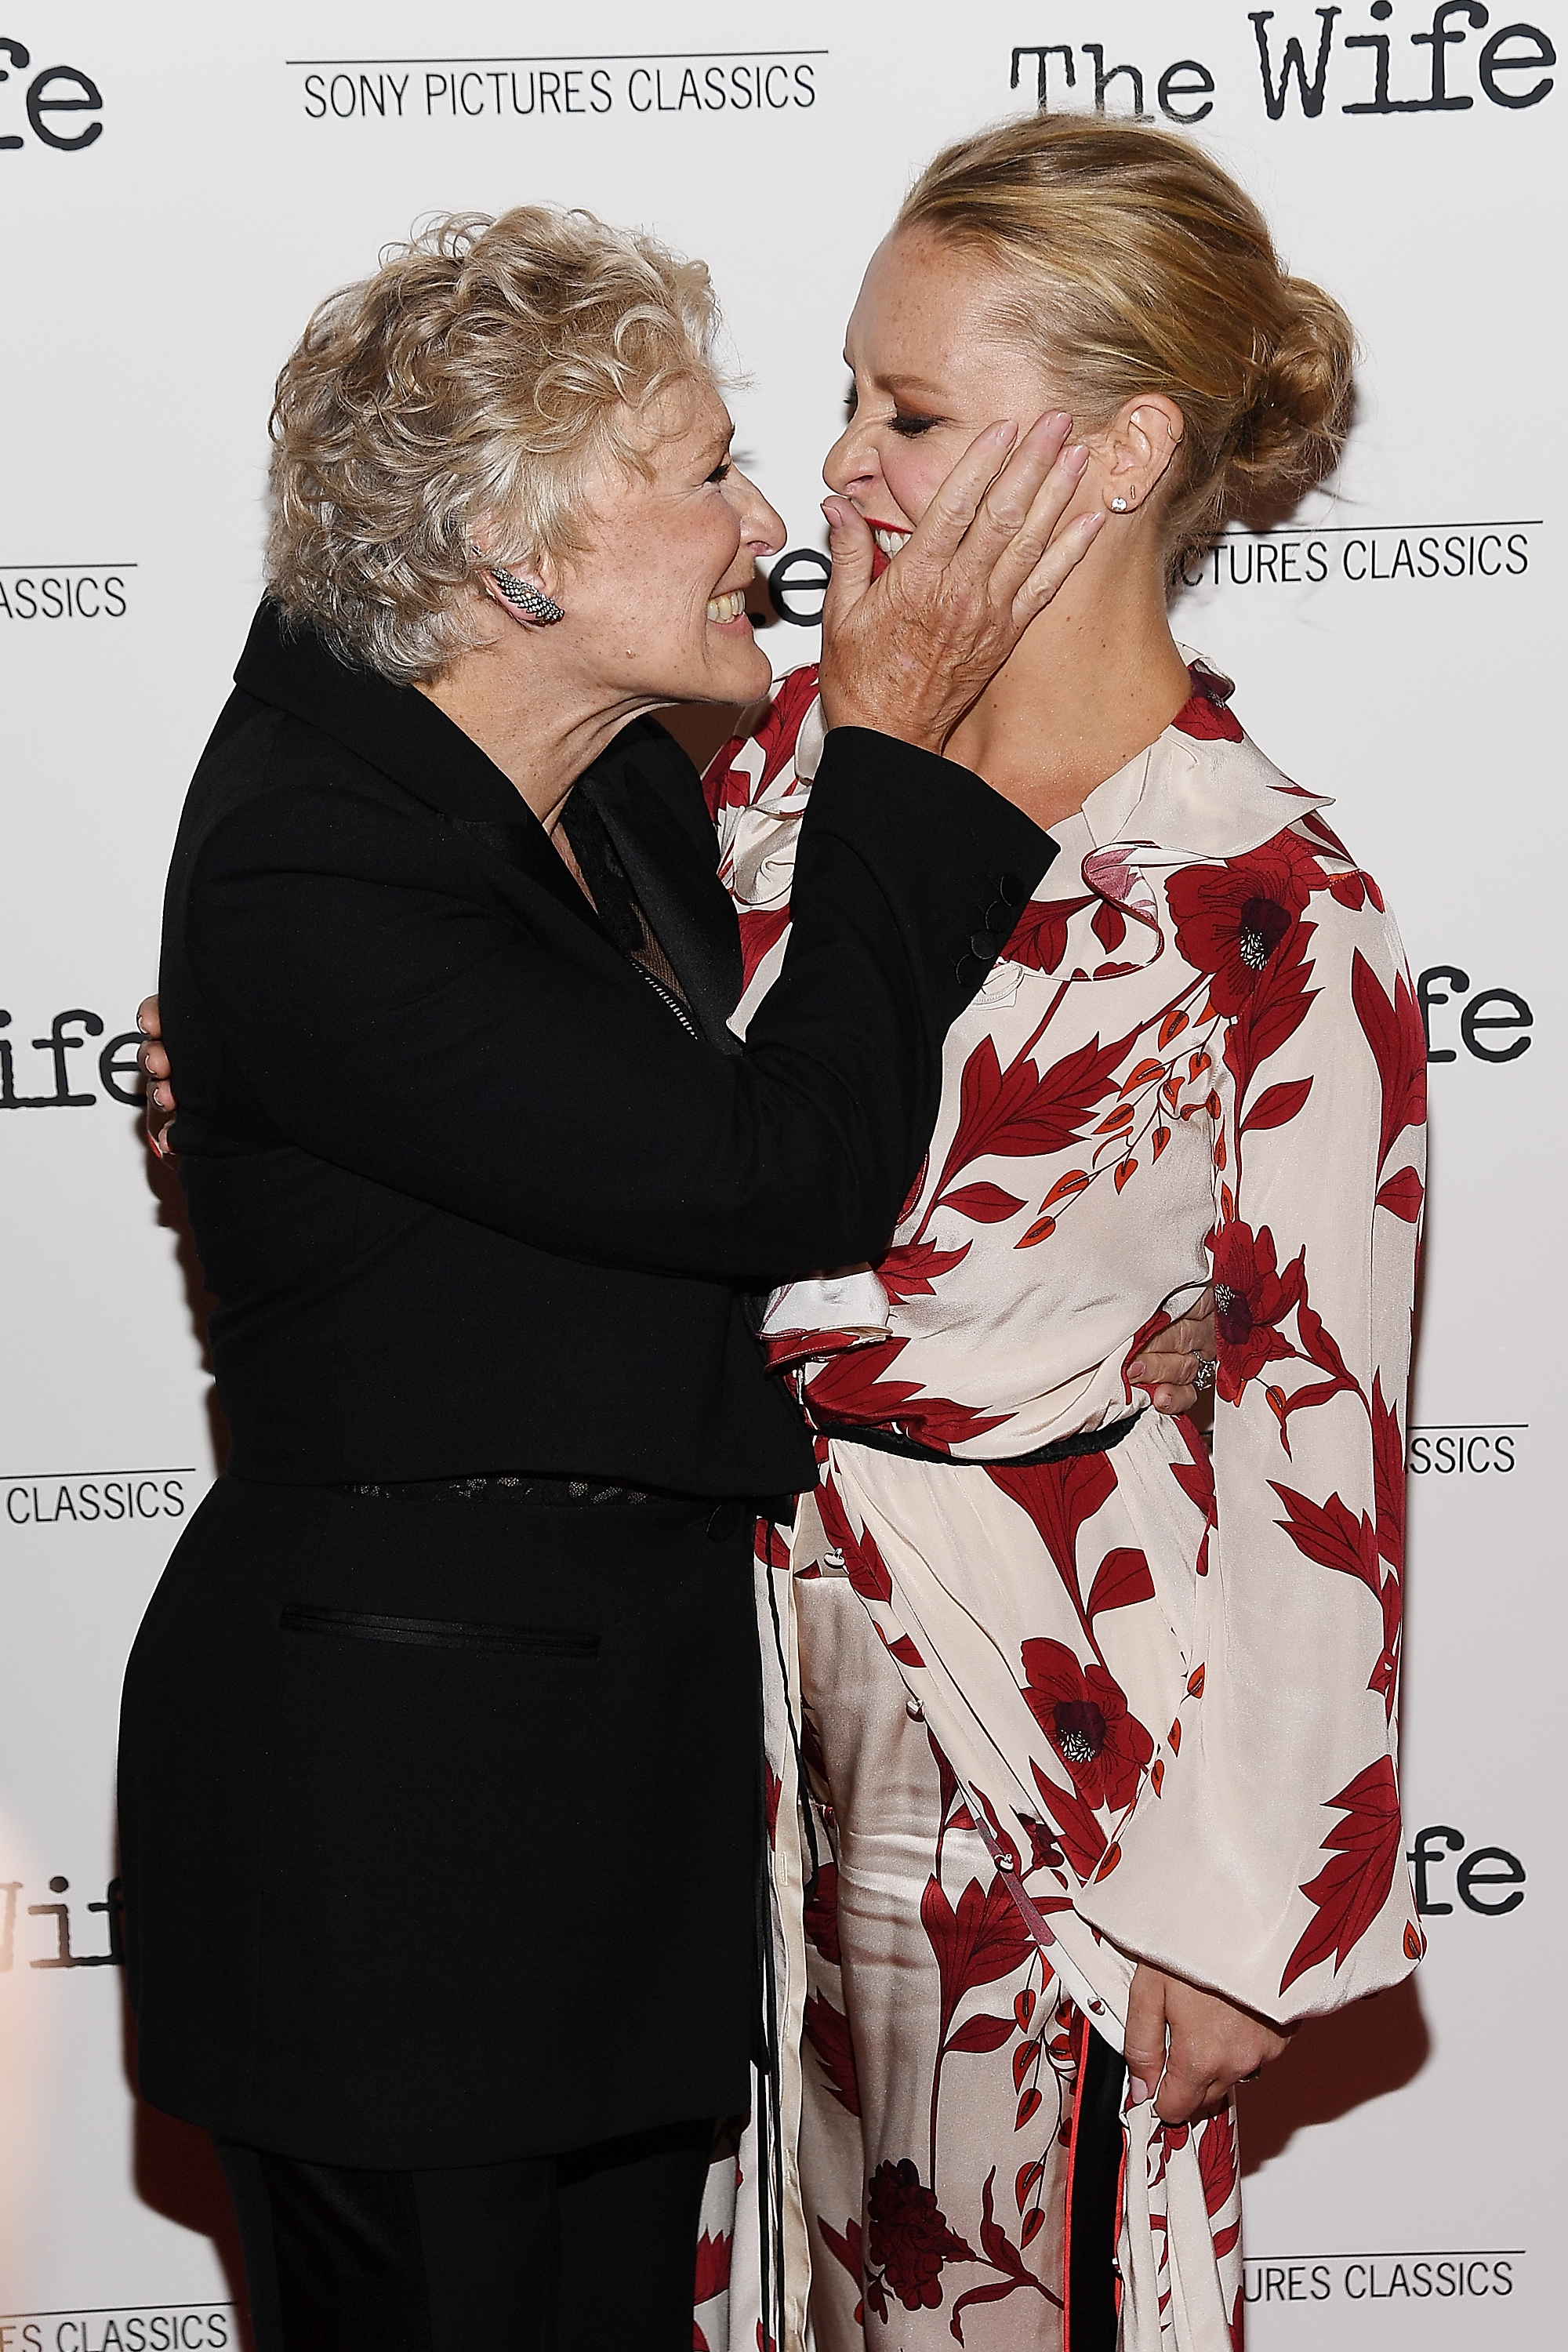 Glenn Close and Annie Starke at the New York Screening of "The Wife" in New York City on July 26, 2018 | Source: Getty Images